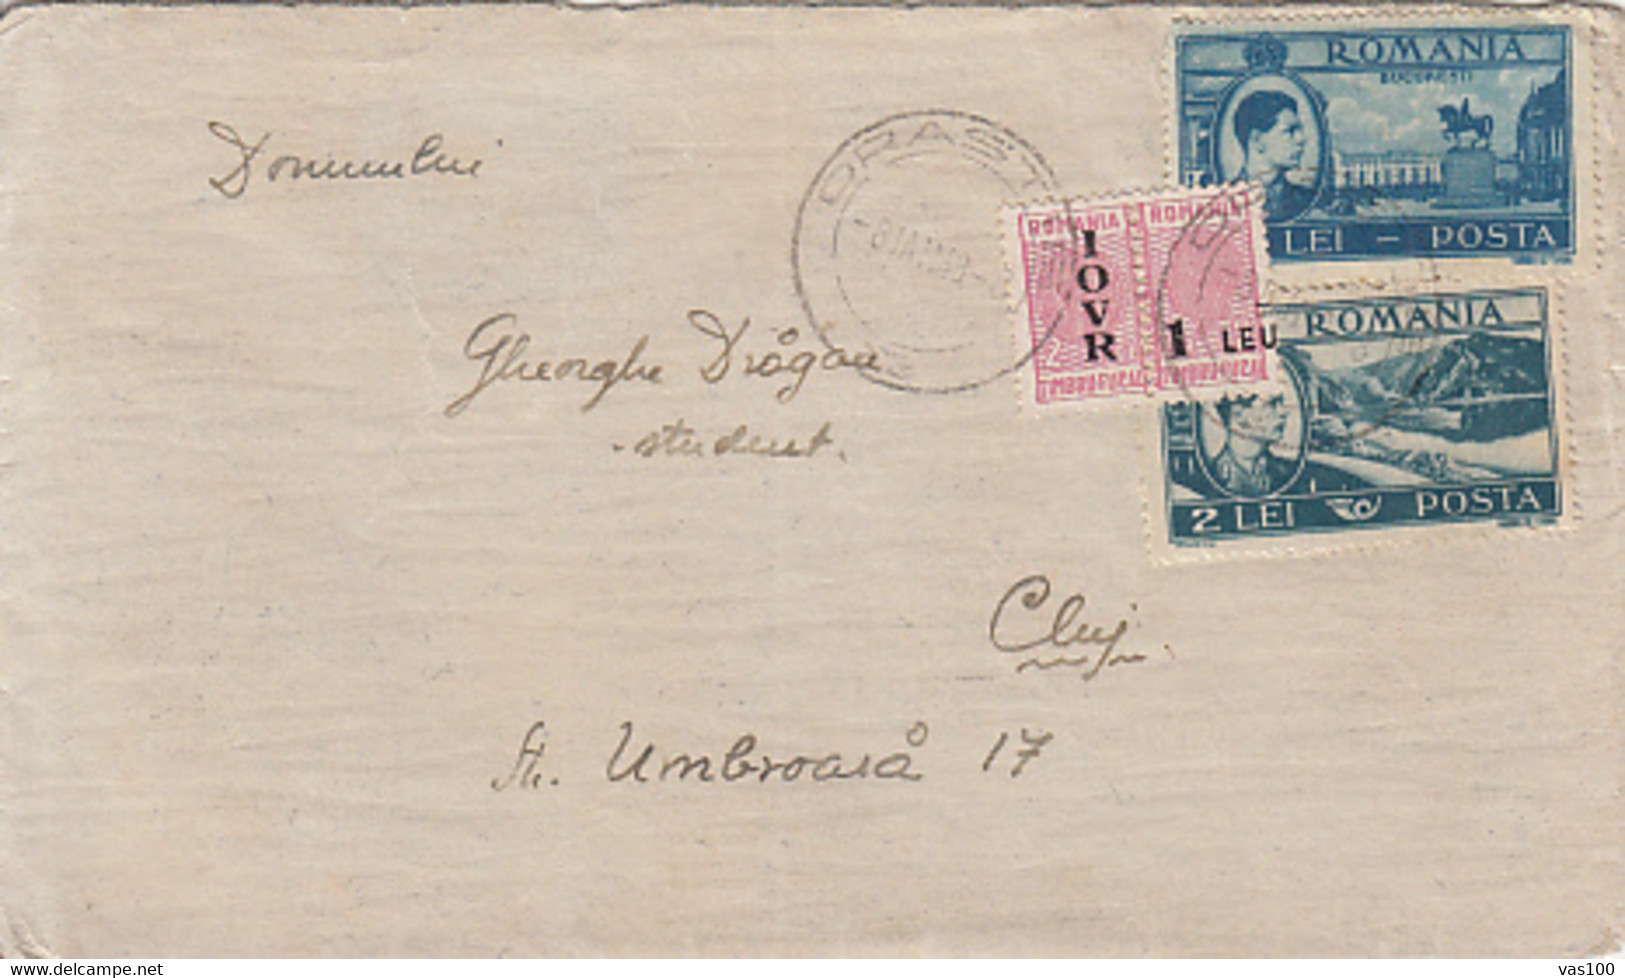 IOVR OVERPRINT REVENUE STAMP, KING MICHAEL, DANUBE, SHIP, BUCHAREST STATUE STAMPS ON COVER, 1948, ROMANIA - Steuermarken